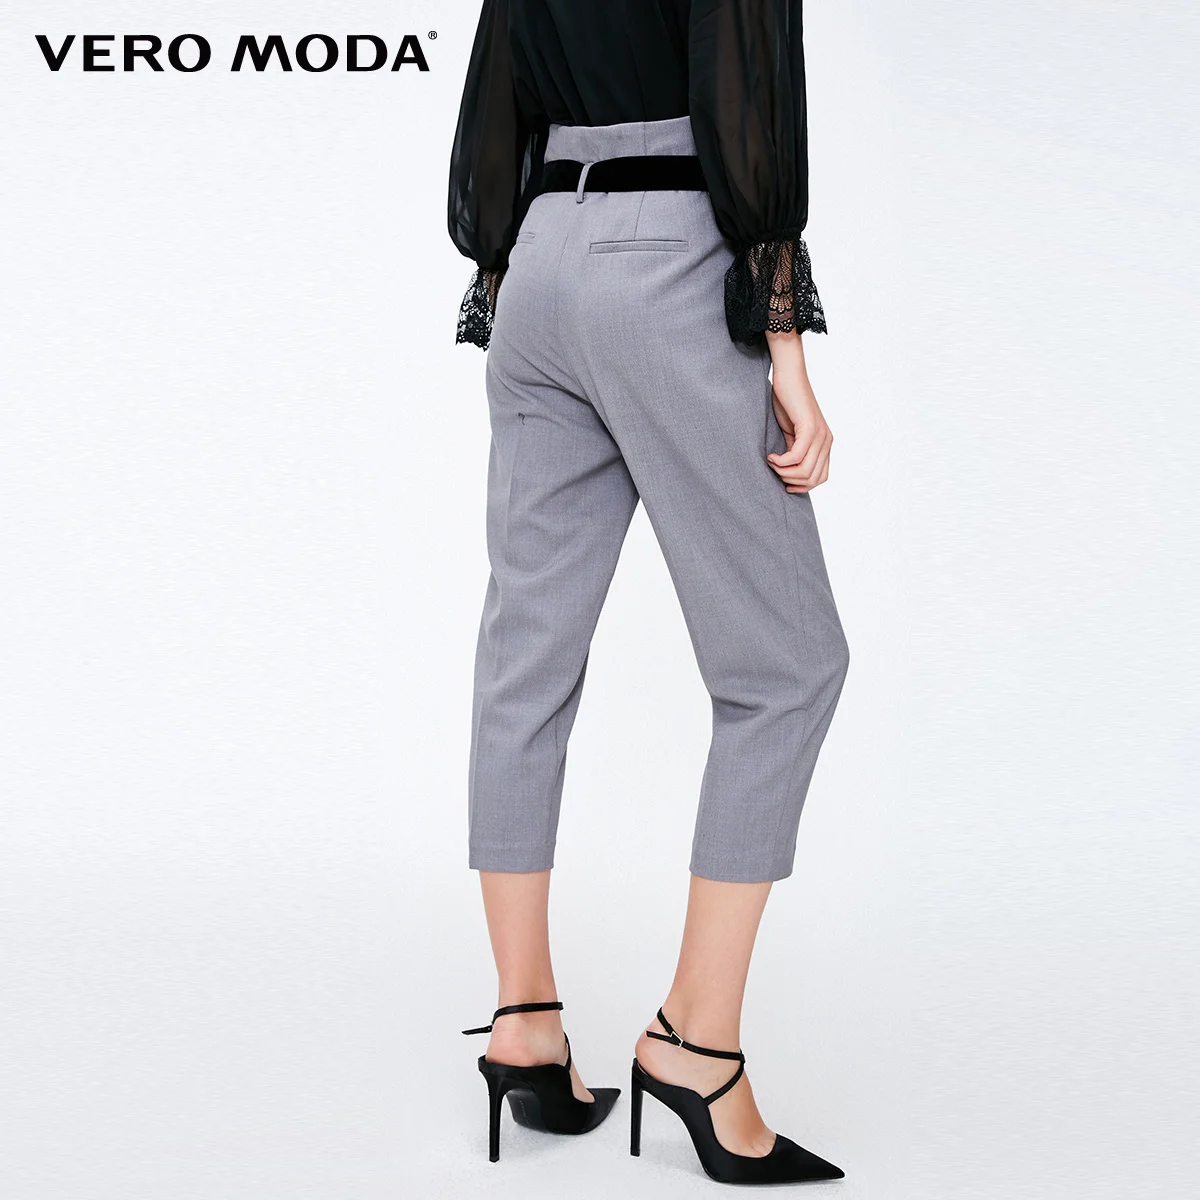 Vero Moda New Women's High-rise Lace-up Pleated Leisure Pants | 31836J537